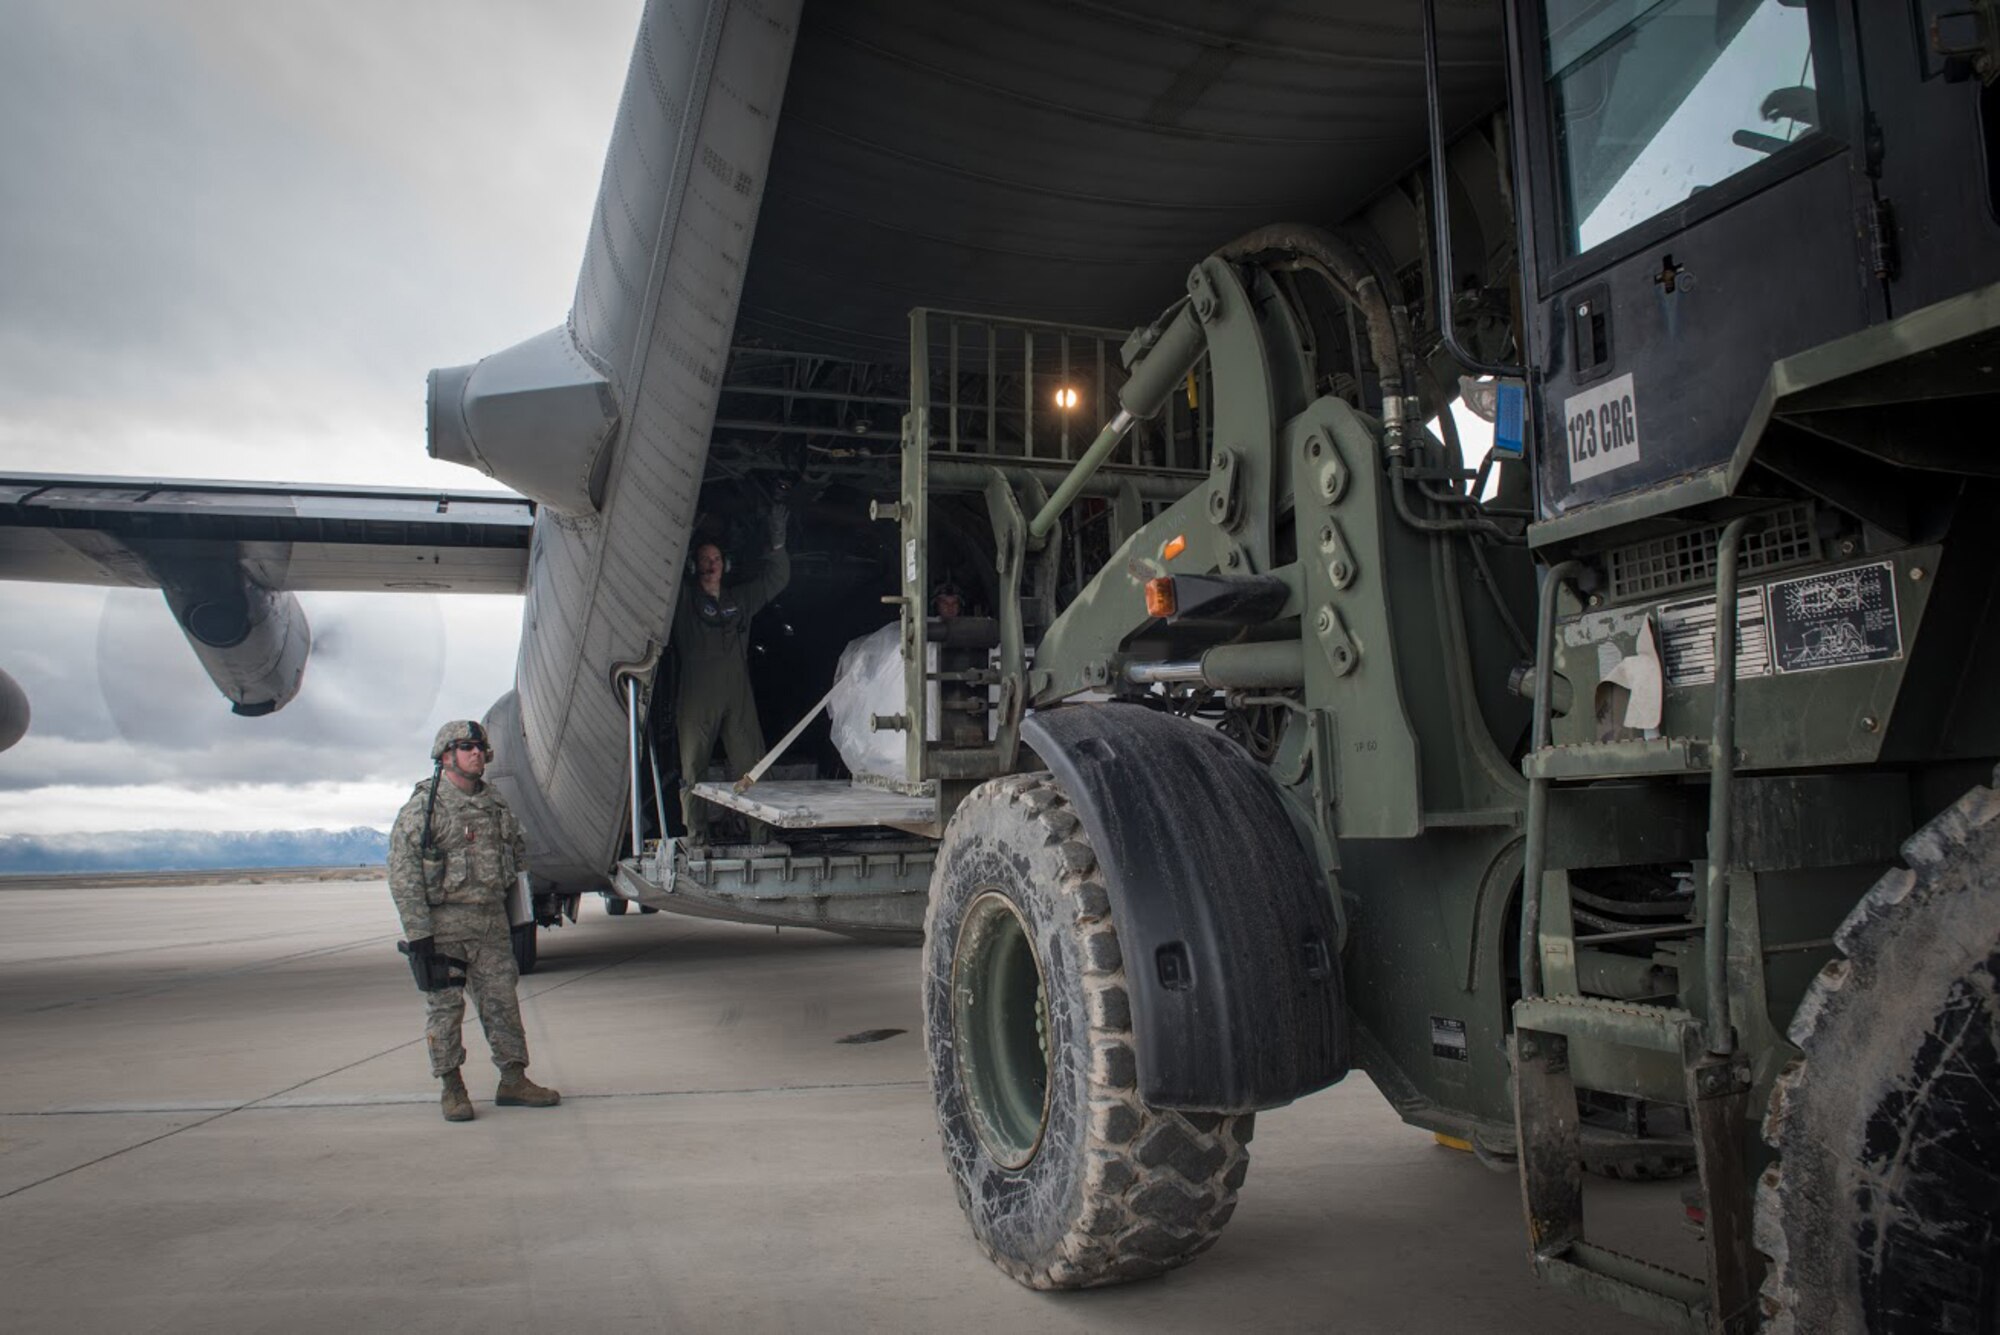 Aerial porters from the Kentucky Air National Guard’s 123rd Contingency Response Group unload cargo from a Wyoming Air National Guard C-130 at Amedee Army Airfield, Calif., on March 8, 2016. The 123rd CRG is working in conjunction with the U.S. Army’s 688th Rapid Port Opening Element and a team from the Defense Logistics Agency to operate Joint Task Force-Port Opening Sangala during a week-long exercise called Operation Lumberjack. The objective of the JTF-PO is to establish an aerial port of debarkation, provide initial distribution capability and set up warehousing for distribution beyond a forward node. (Kentucky Air National Guard photo by Master Sgt. Phil Speck)